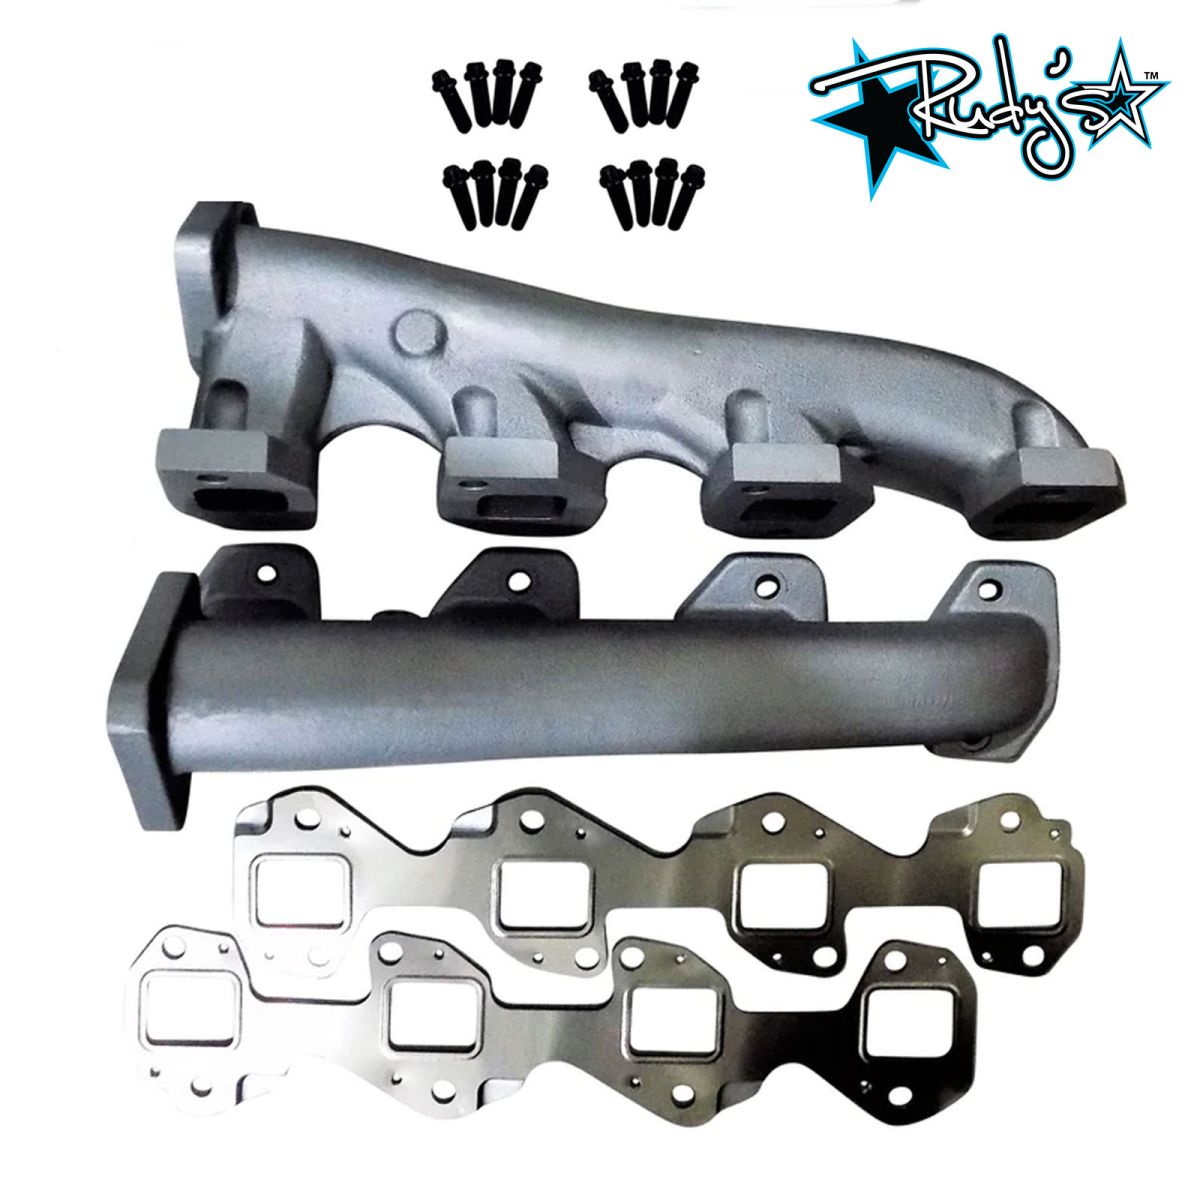 Rudy's Performance Parts - Rudy's High Flow Race Exhaust Manifolds & Gaskets For 01-04 GM 6.6L Duramax